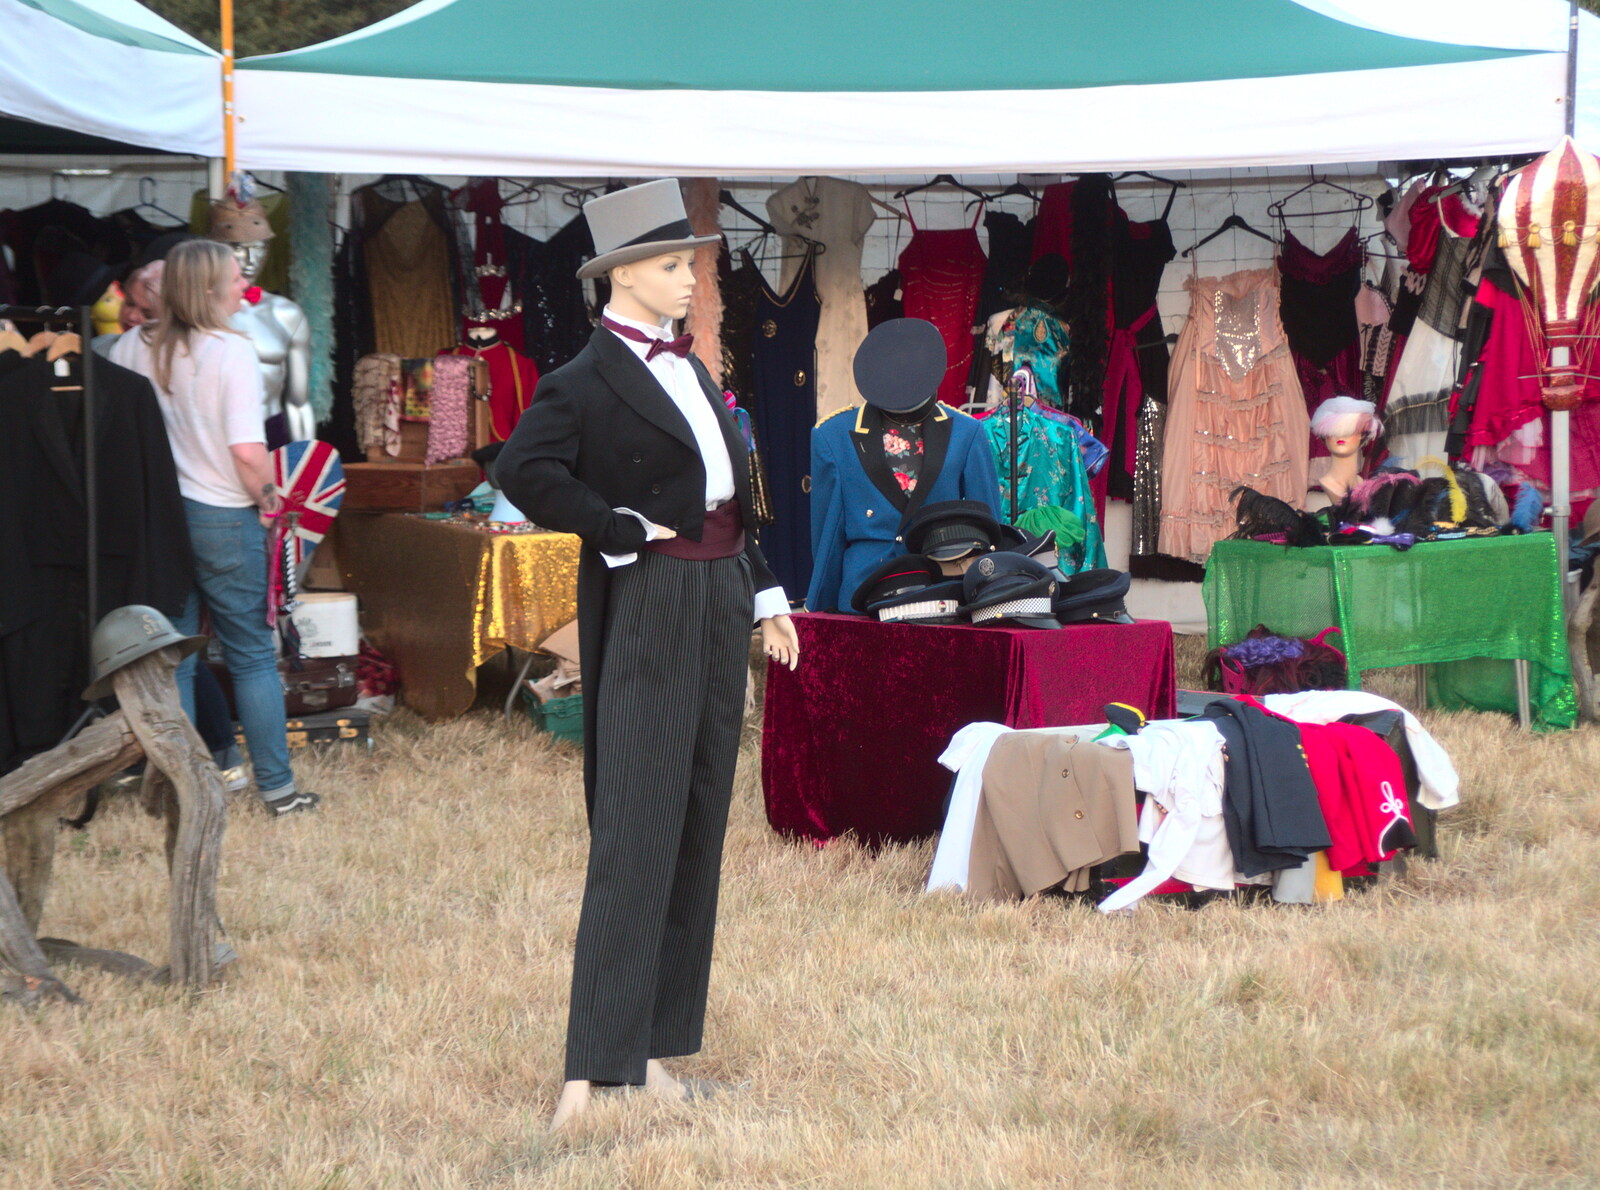 A well-dressed mannequin from WoW Festival, Burston, Norfolk - 29th June - 1st July 2018